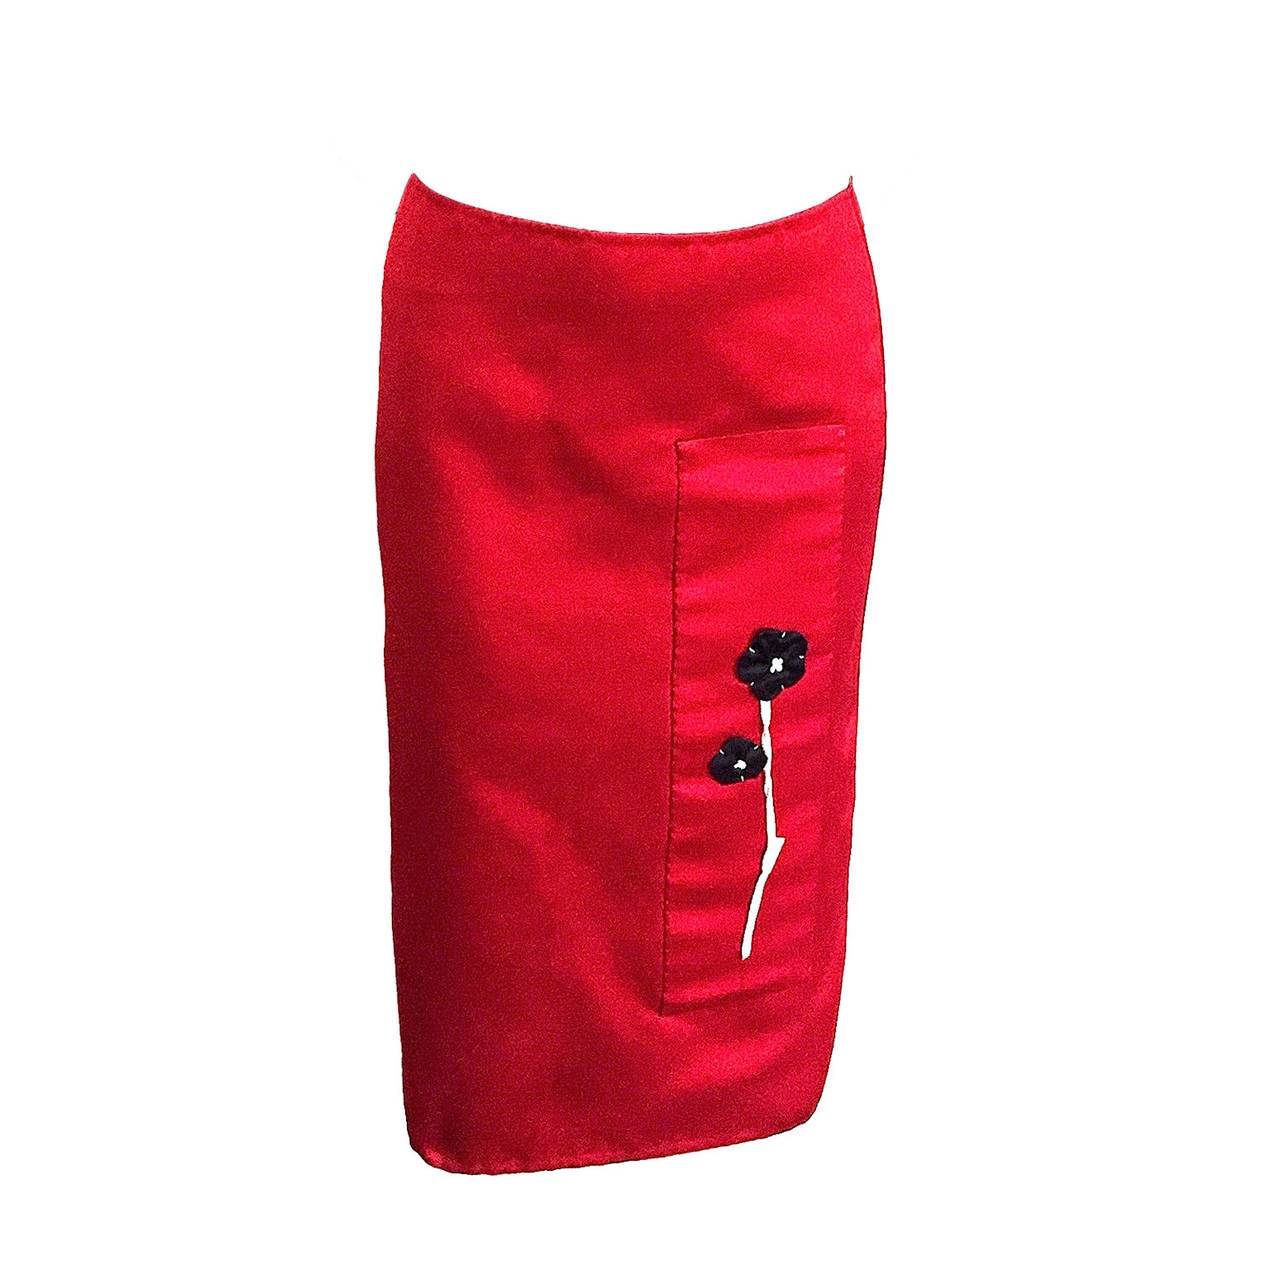 Prada Red Satin Runway Skirt with Flower Applique, IT 40 For Sale